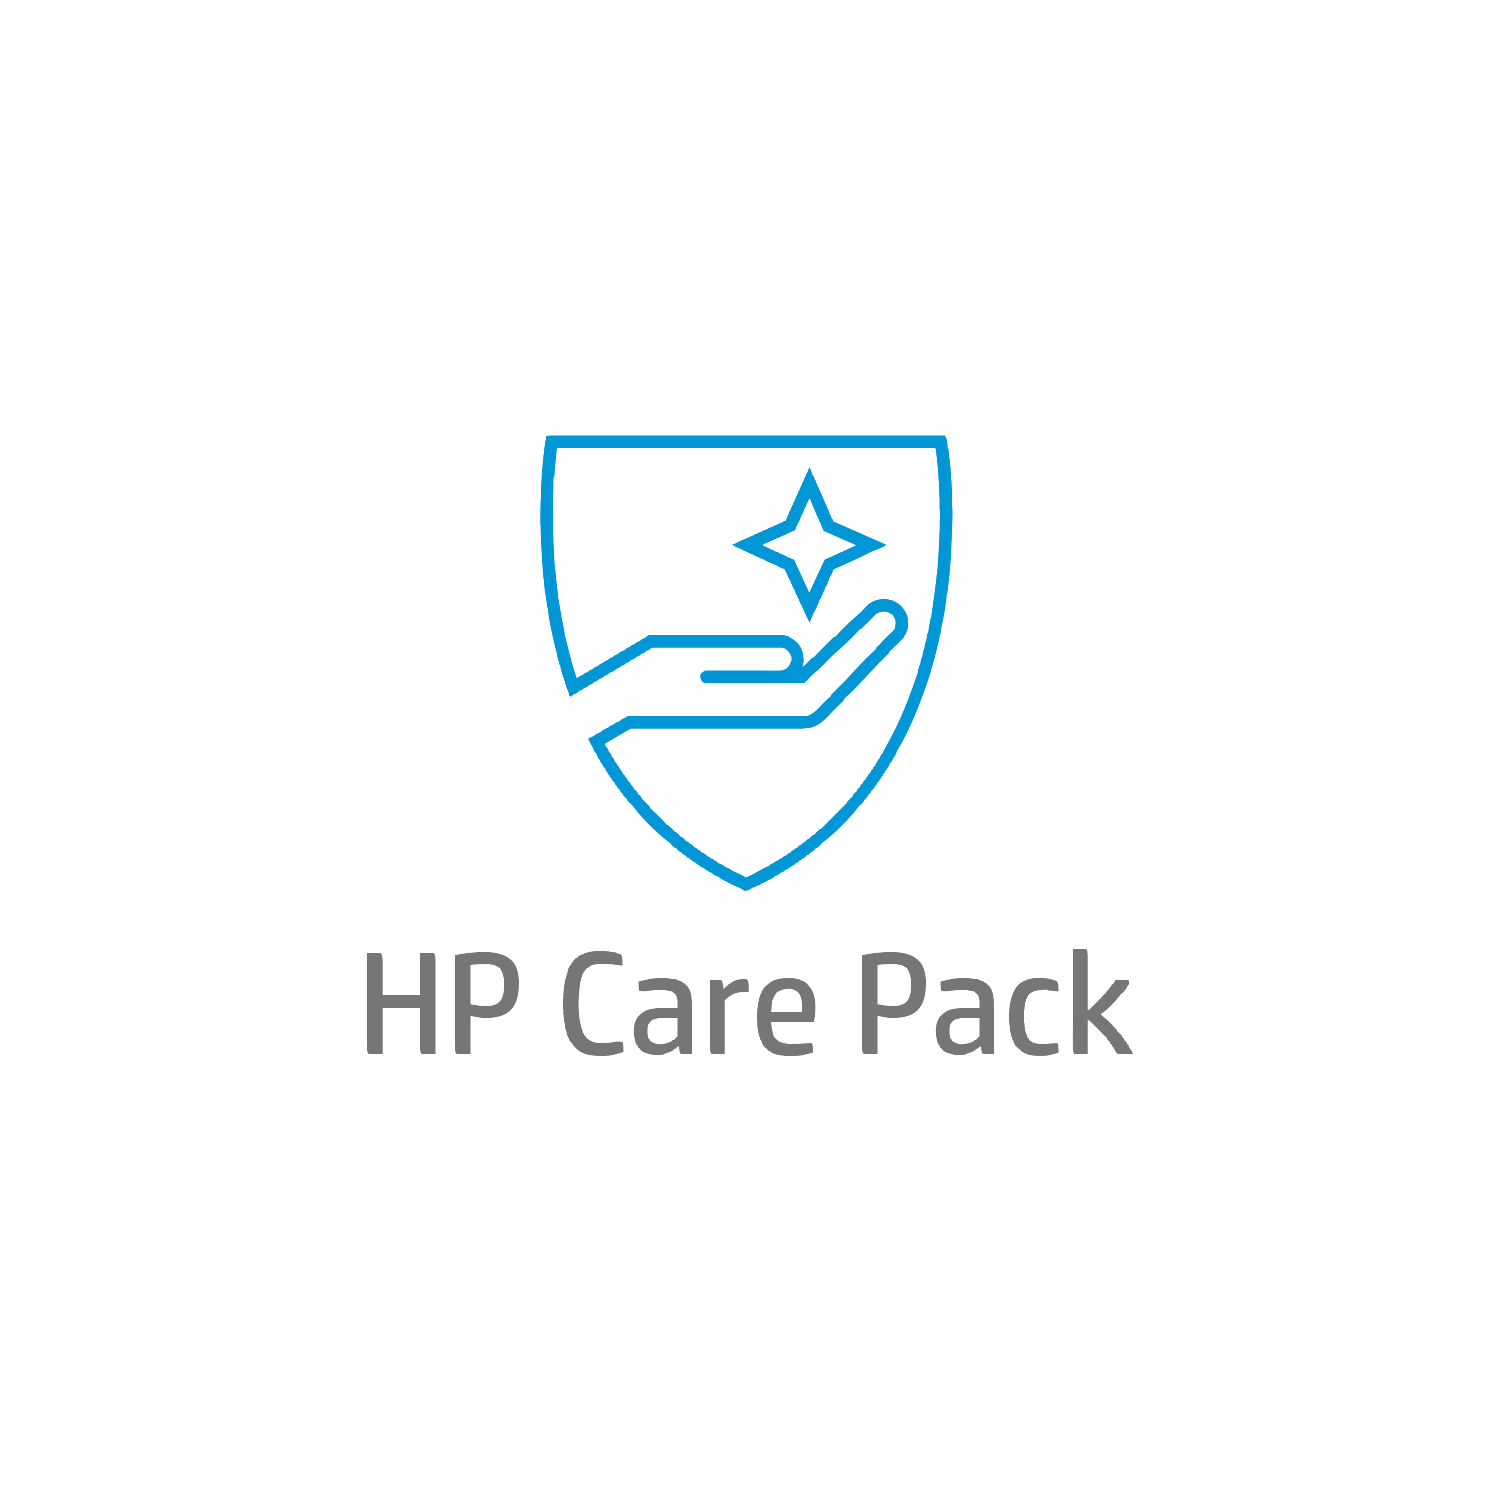 Bild von HP 5y Active Care Next Business Day Response Onsite w/1x DLE MWS HW Supp, Active Care, Remote and Onsite, In warranty, Standard workdays - 9 hours, 5 years, Next business day response